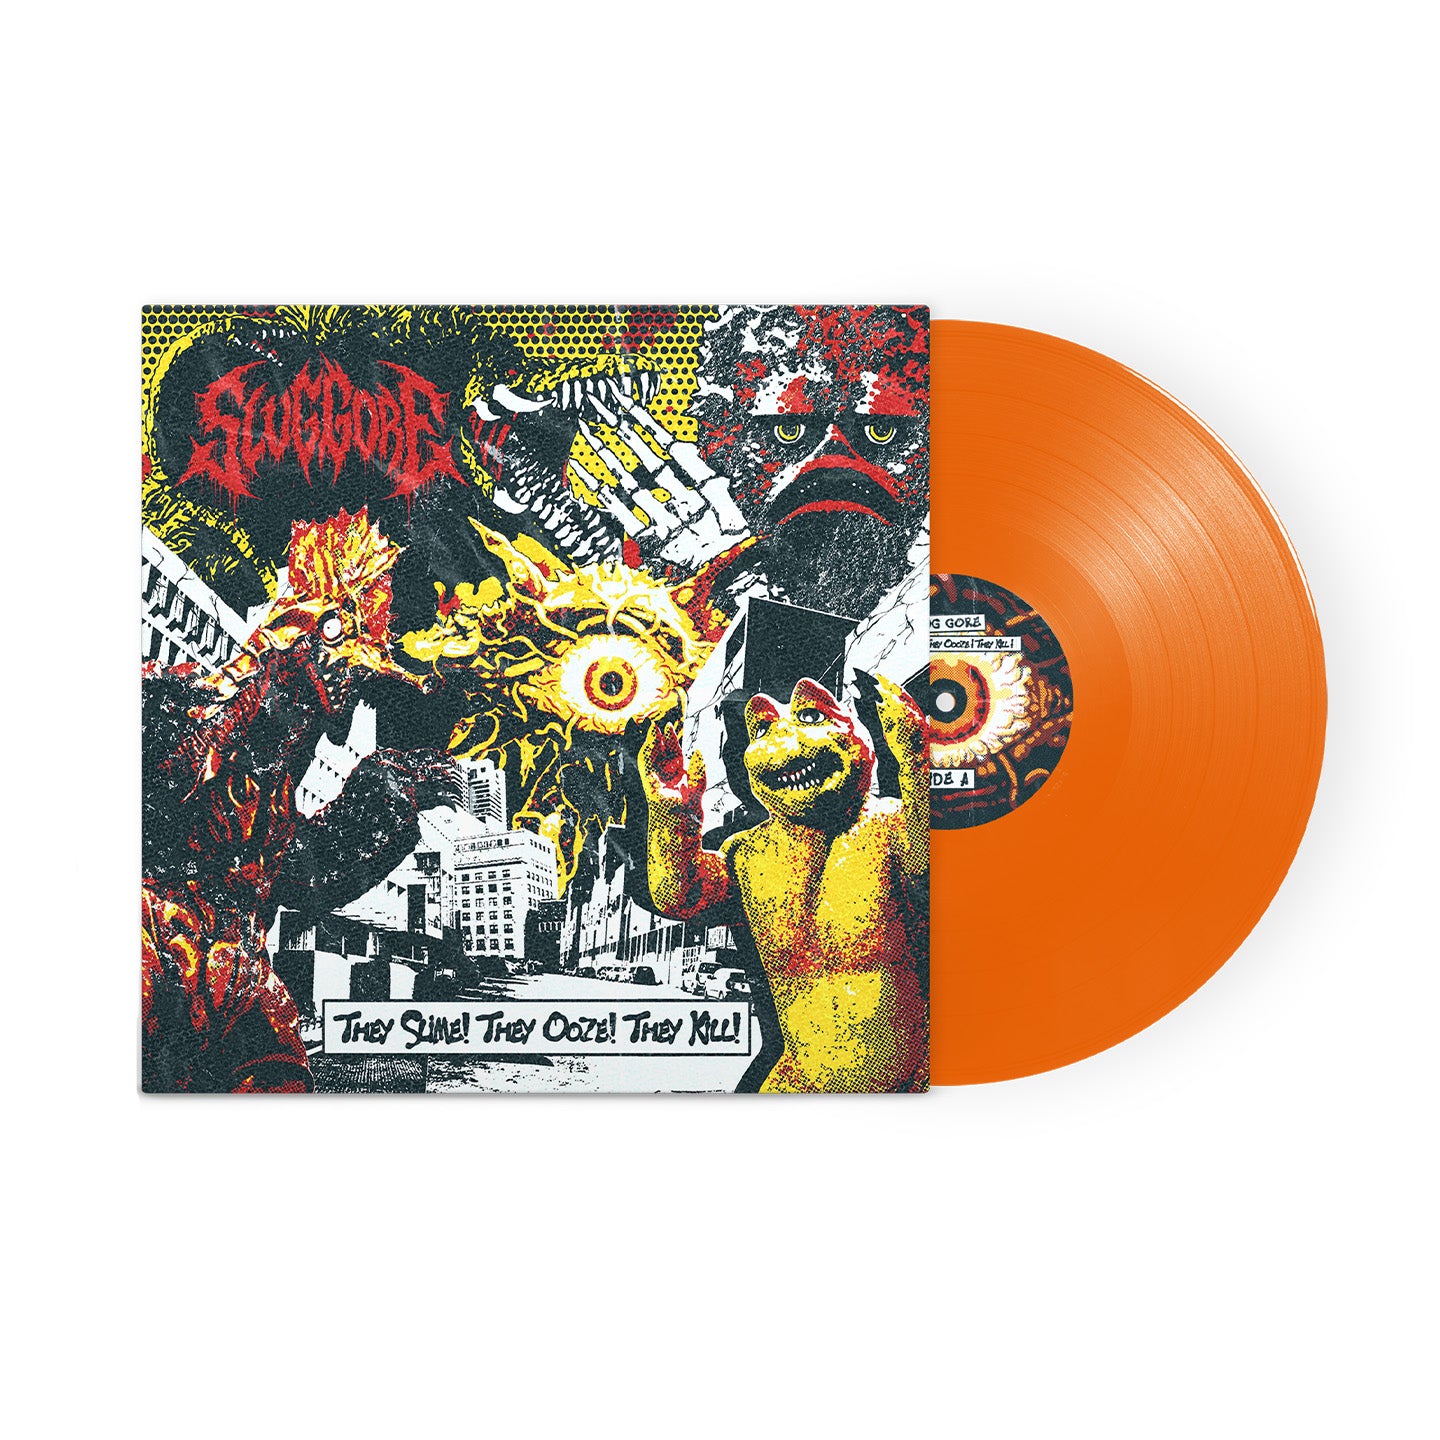 Slug Gore "They Slime! They Ooze! They Kill!" LP Limited color